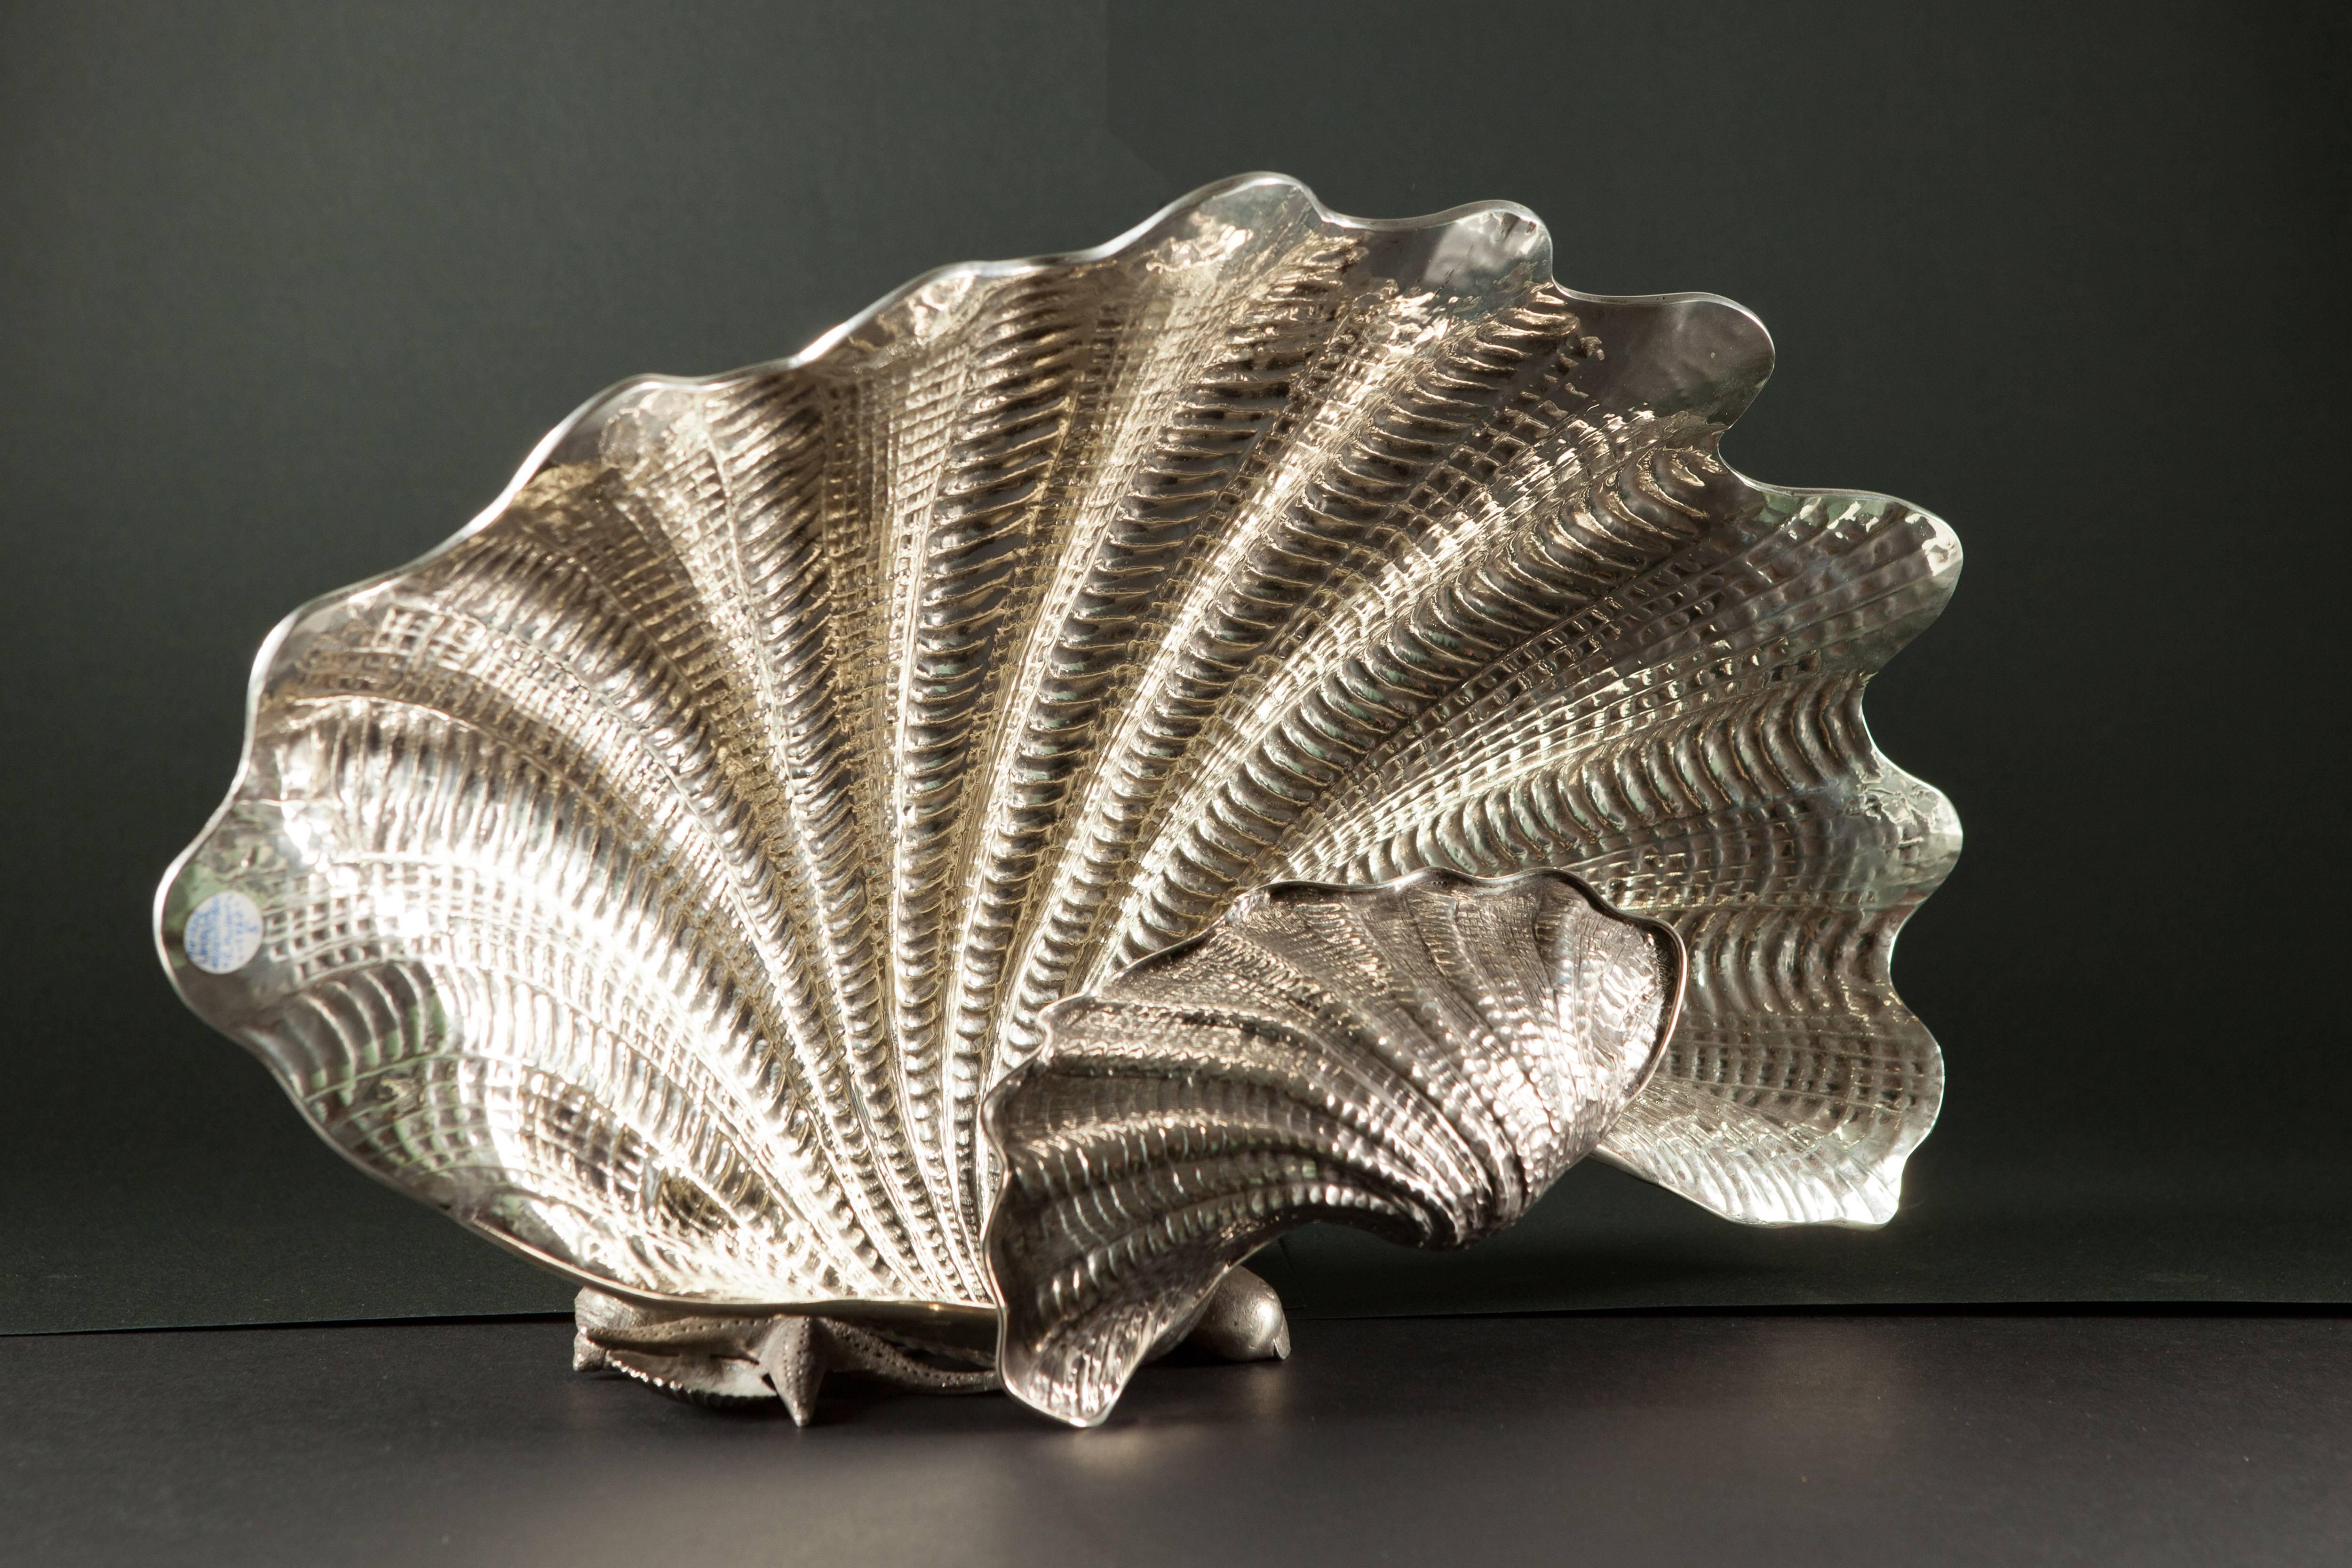 Silver shell shaped Lamp realized from the Italian silversmith Roberto Michetti of Bologna, circa 1910.
Hand embossed and engraved to create two realistic counterposed shells, with applications of corals and sea fruits on the base.
Between the two